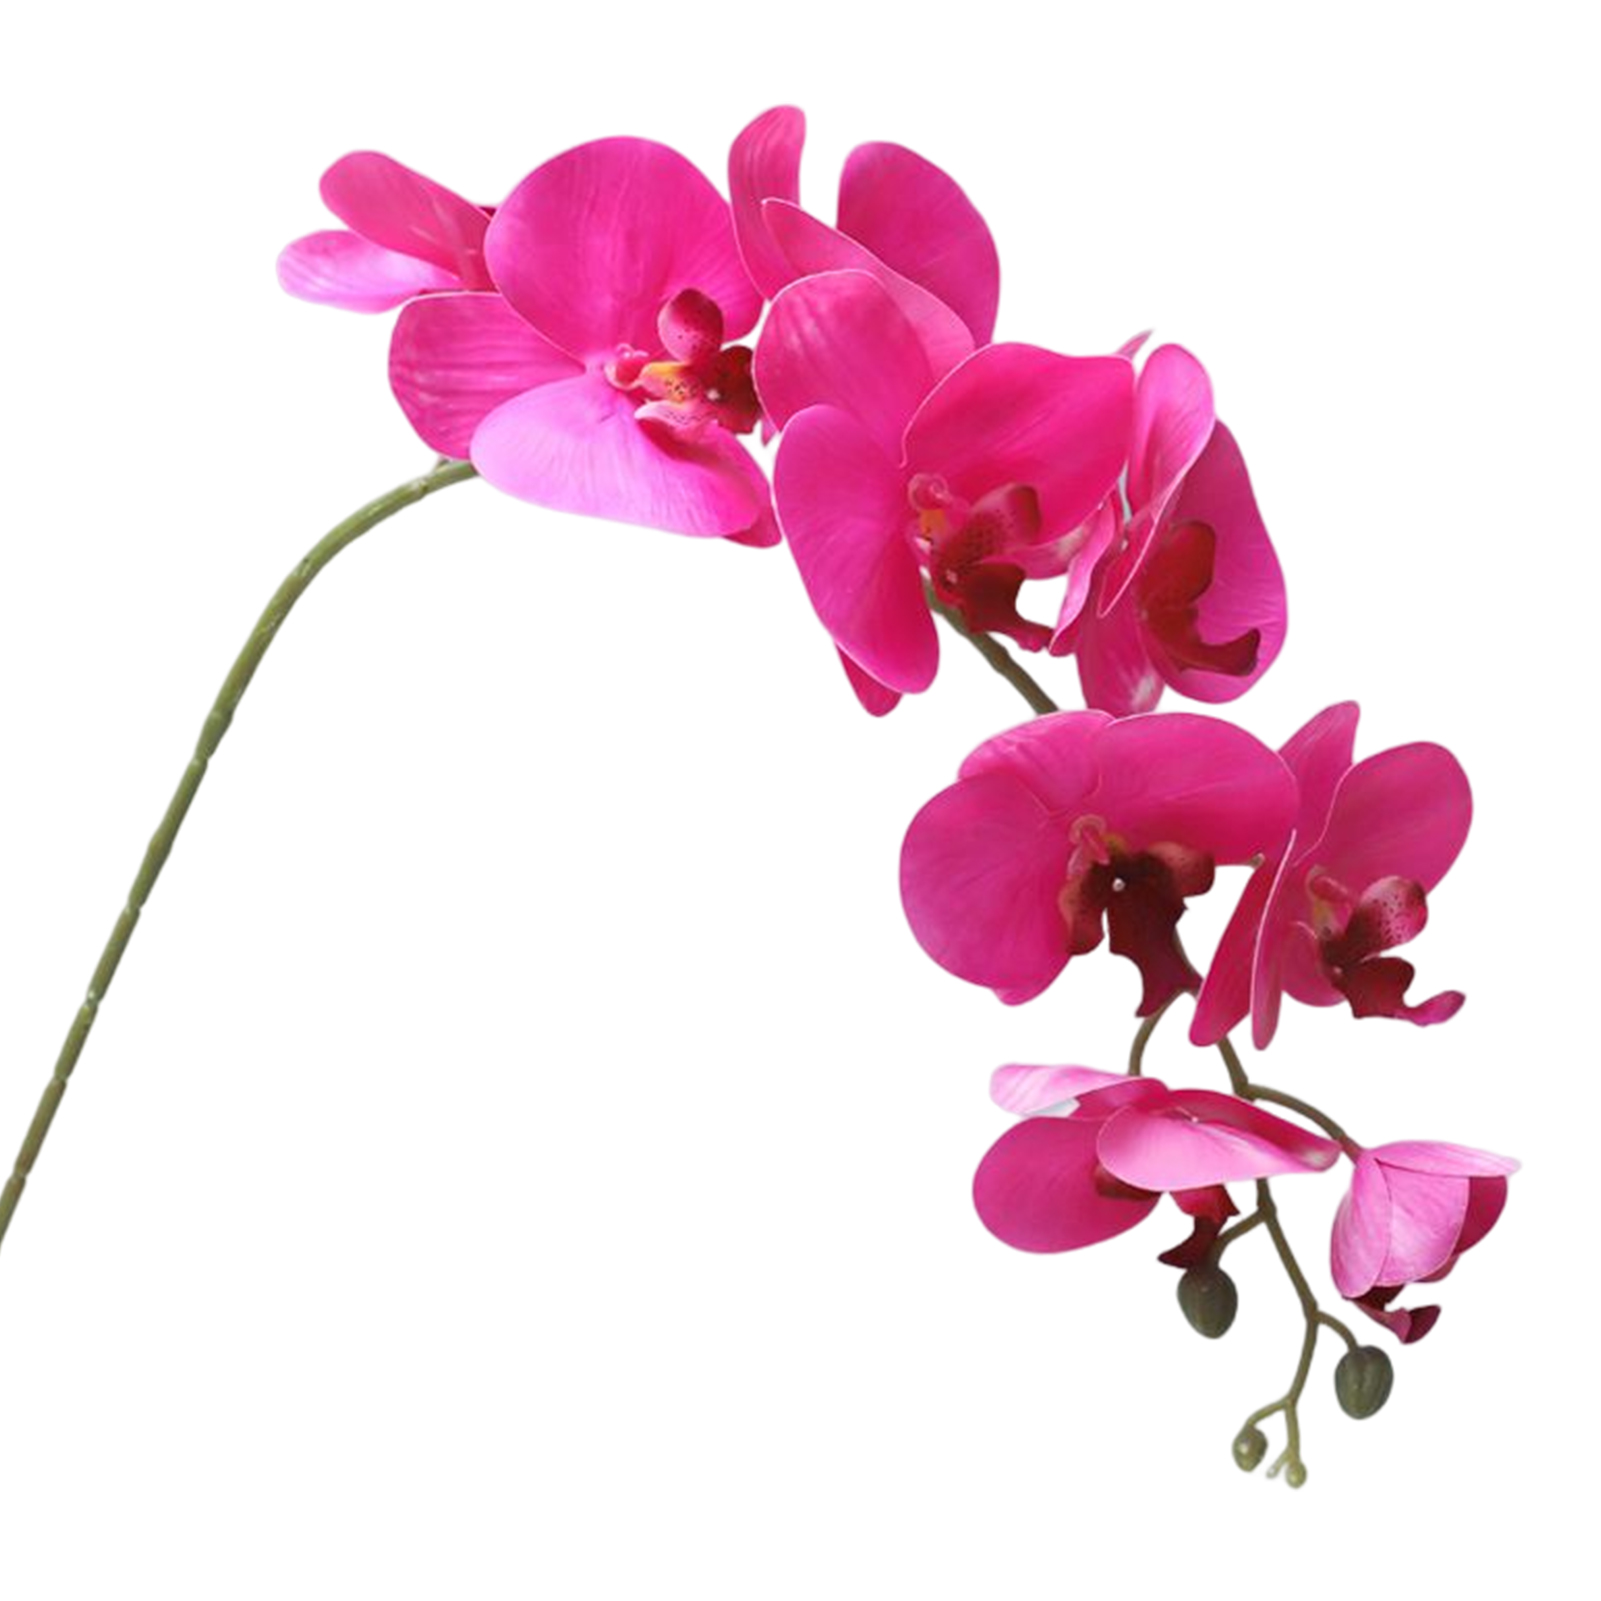 Yesbay 9 Heads Fake Phalaenopsis Multi-fork Handcraft Artificial Butterfly Orchid for Home - image 2 of 8